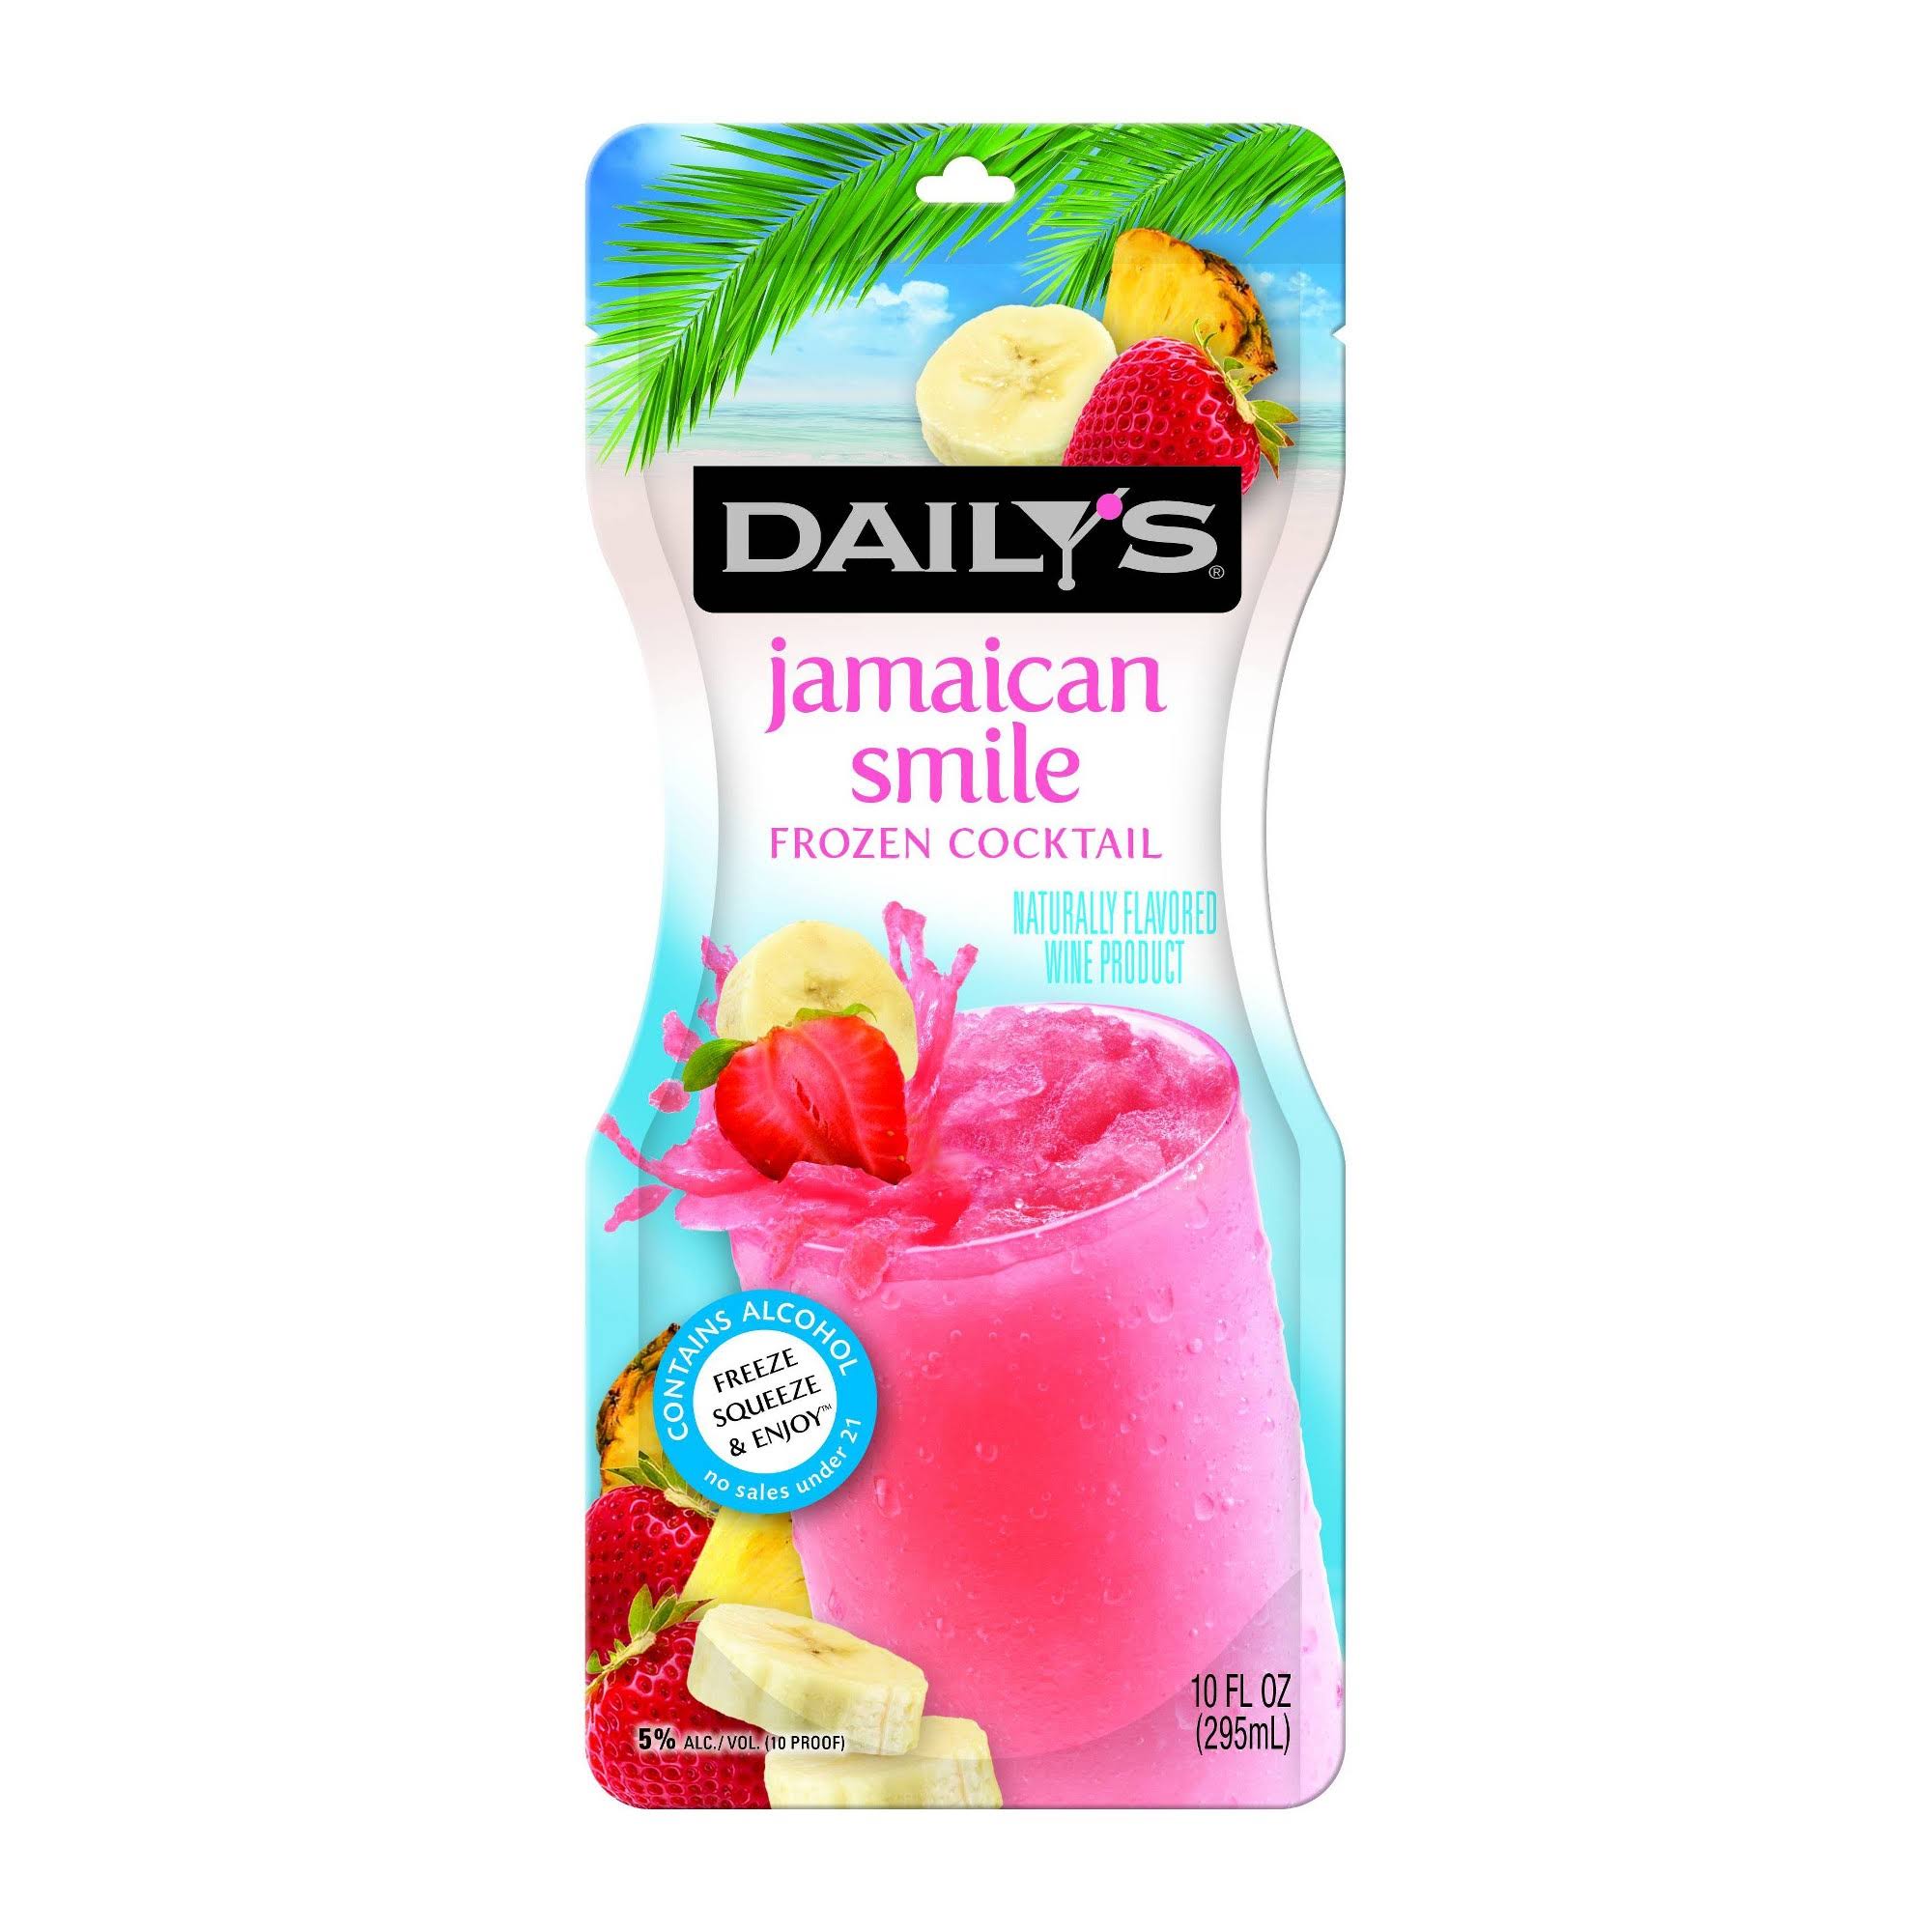 Daily's Tropical Jamaican Smile Frozen Cocktail